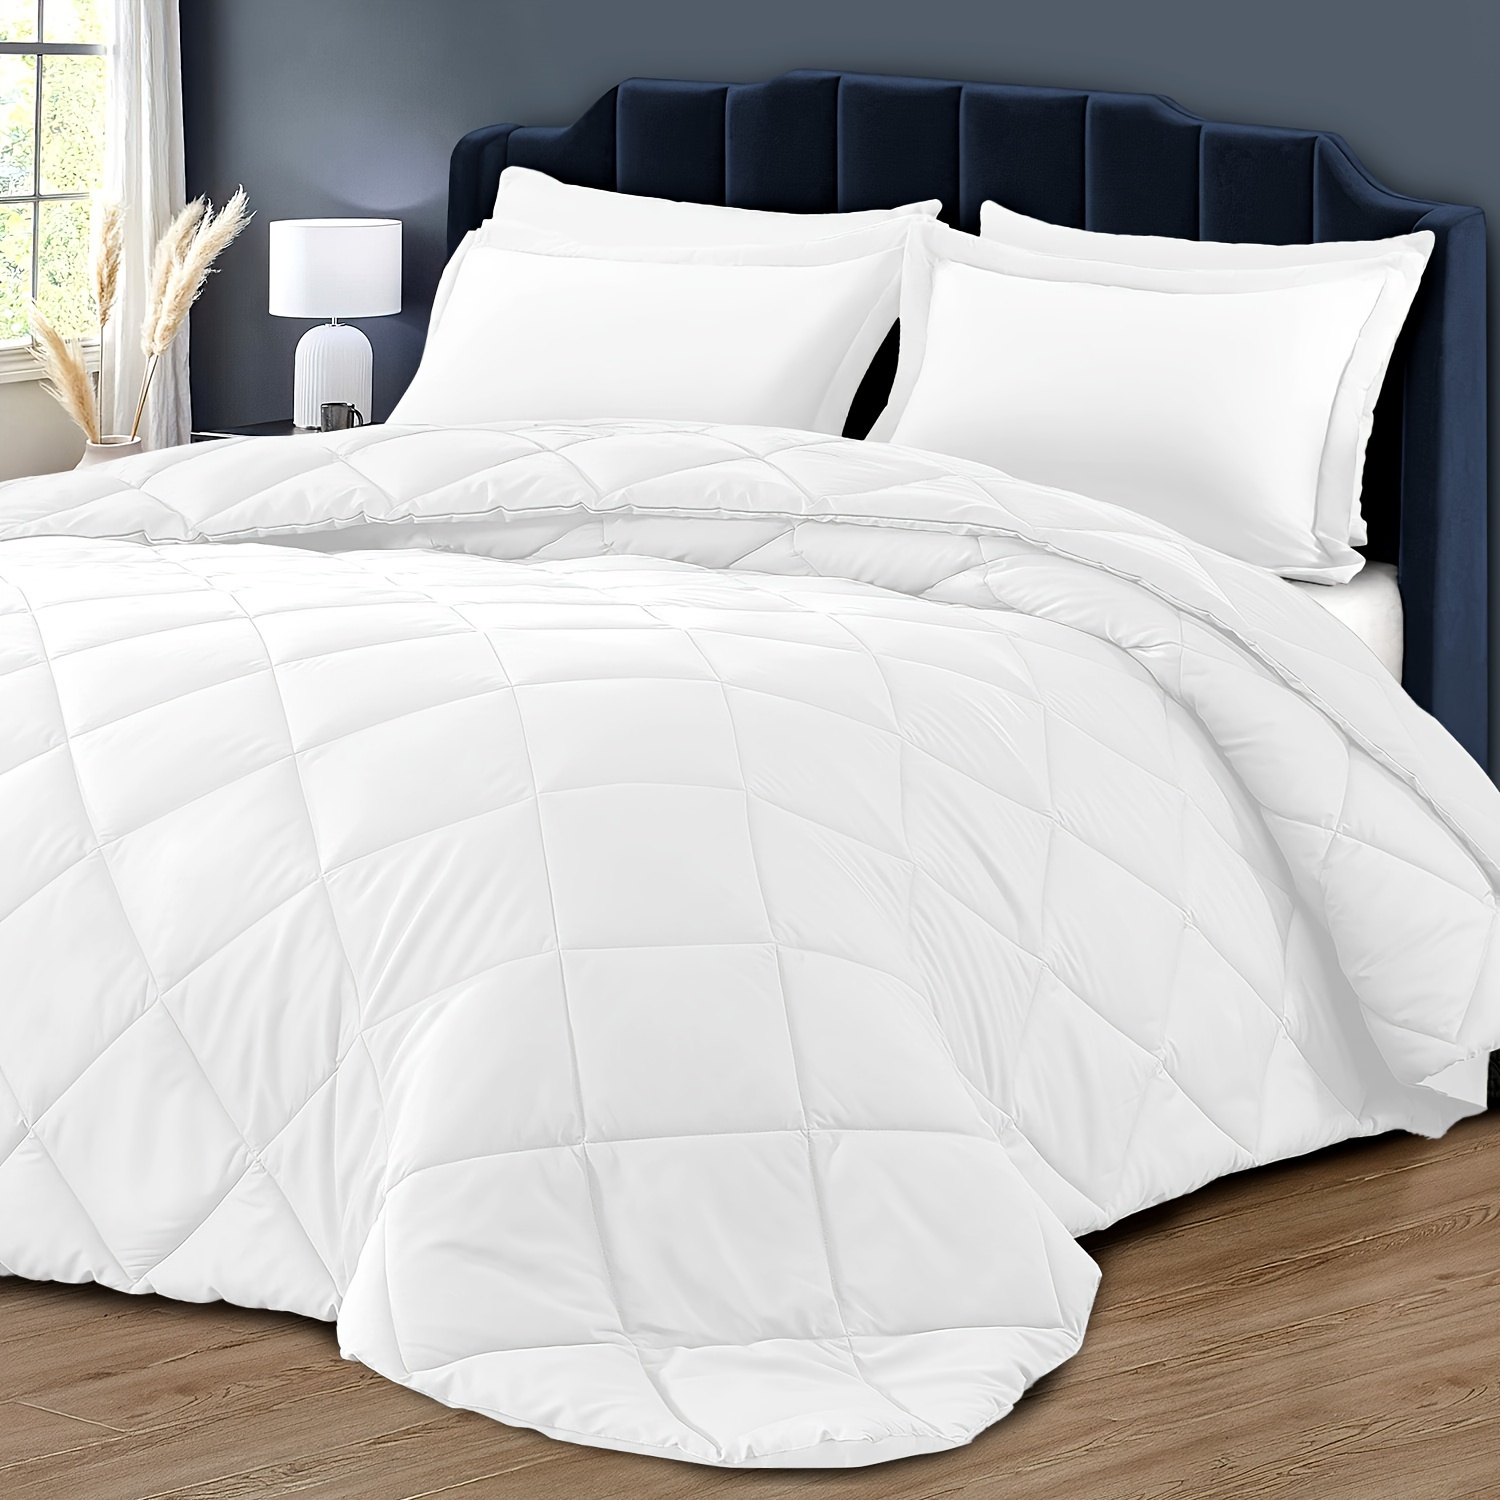 

310gsm Cooling Queen Comforter Set With Pillow Shams - Down Alternative Bed Comforters Bedding Sets For All Season - Lightweight - Machine Washable - White